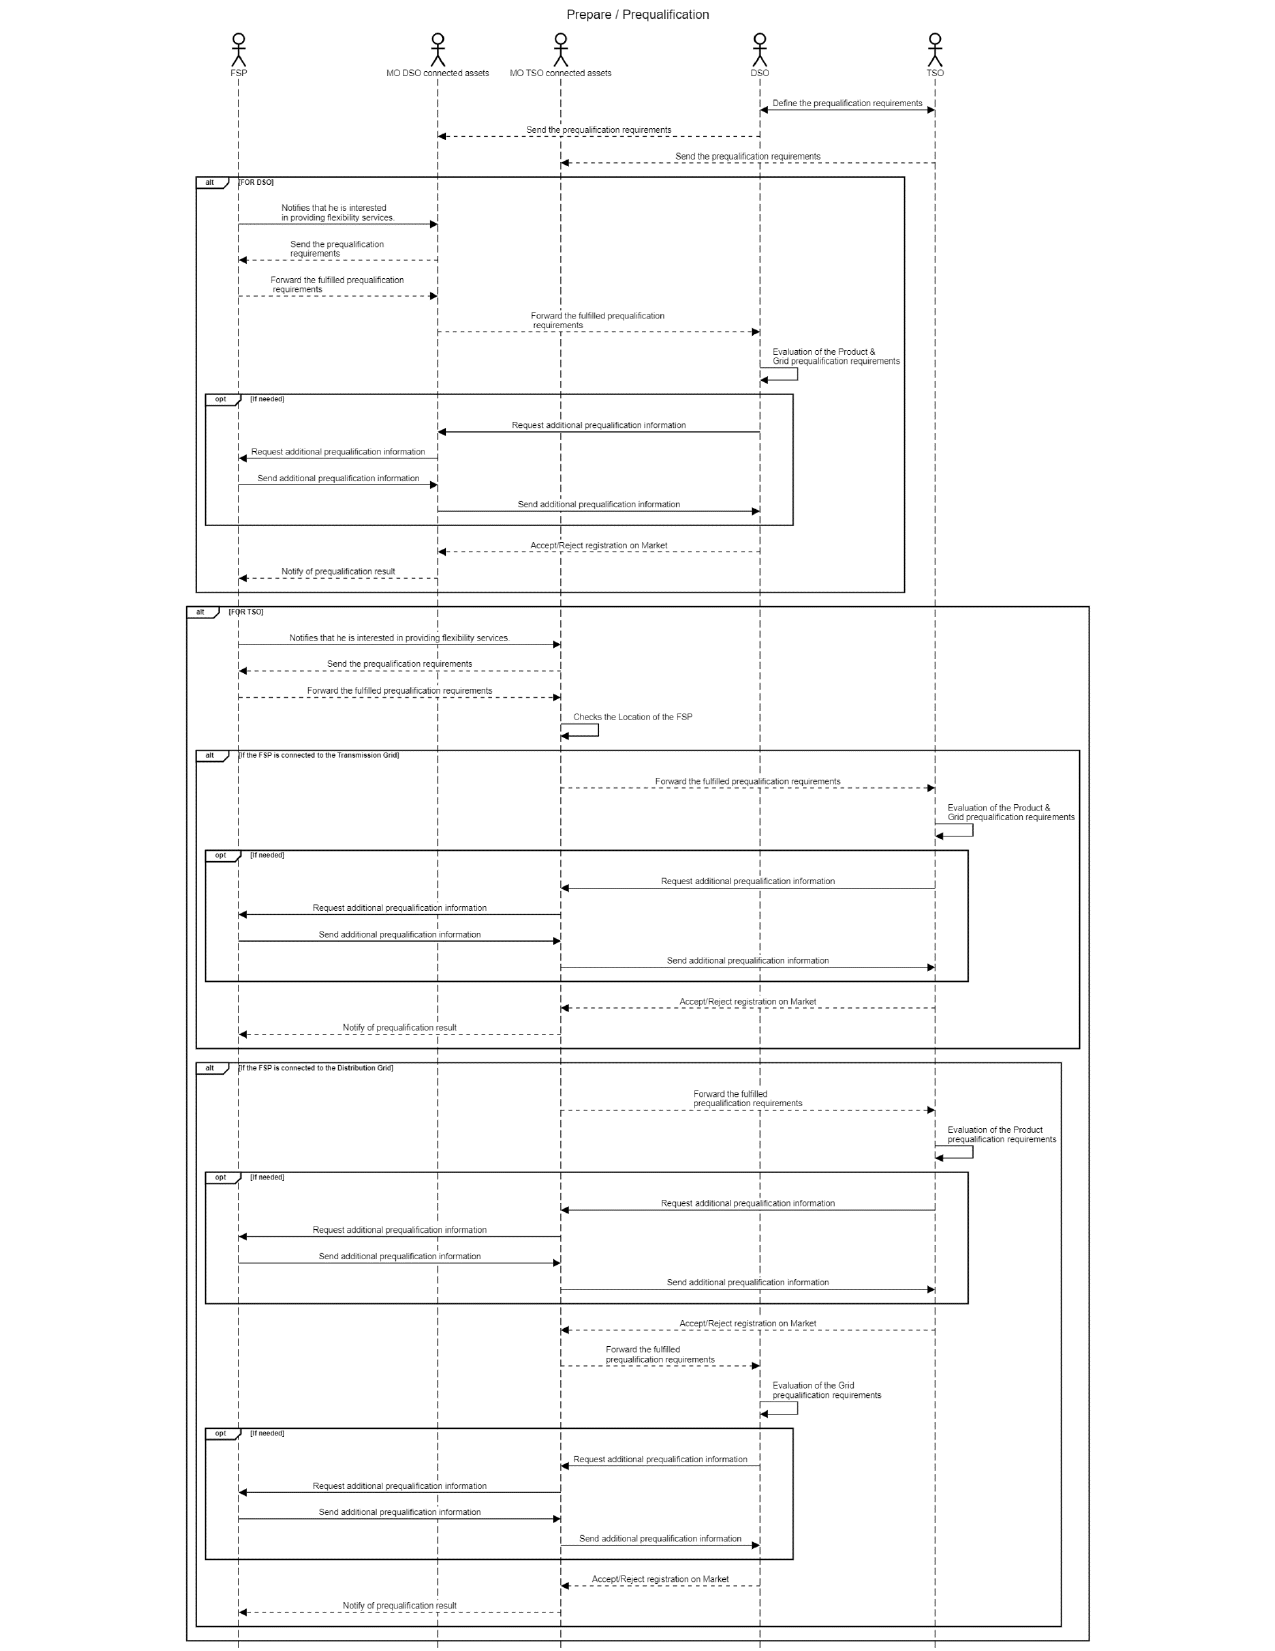 Prequalifiaction_1_SequenceDiagram